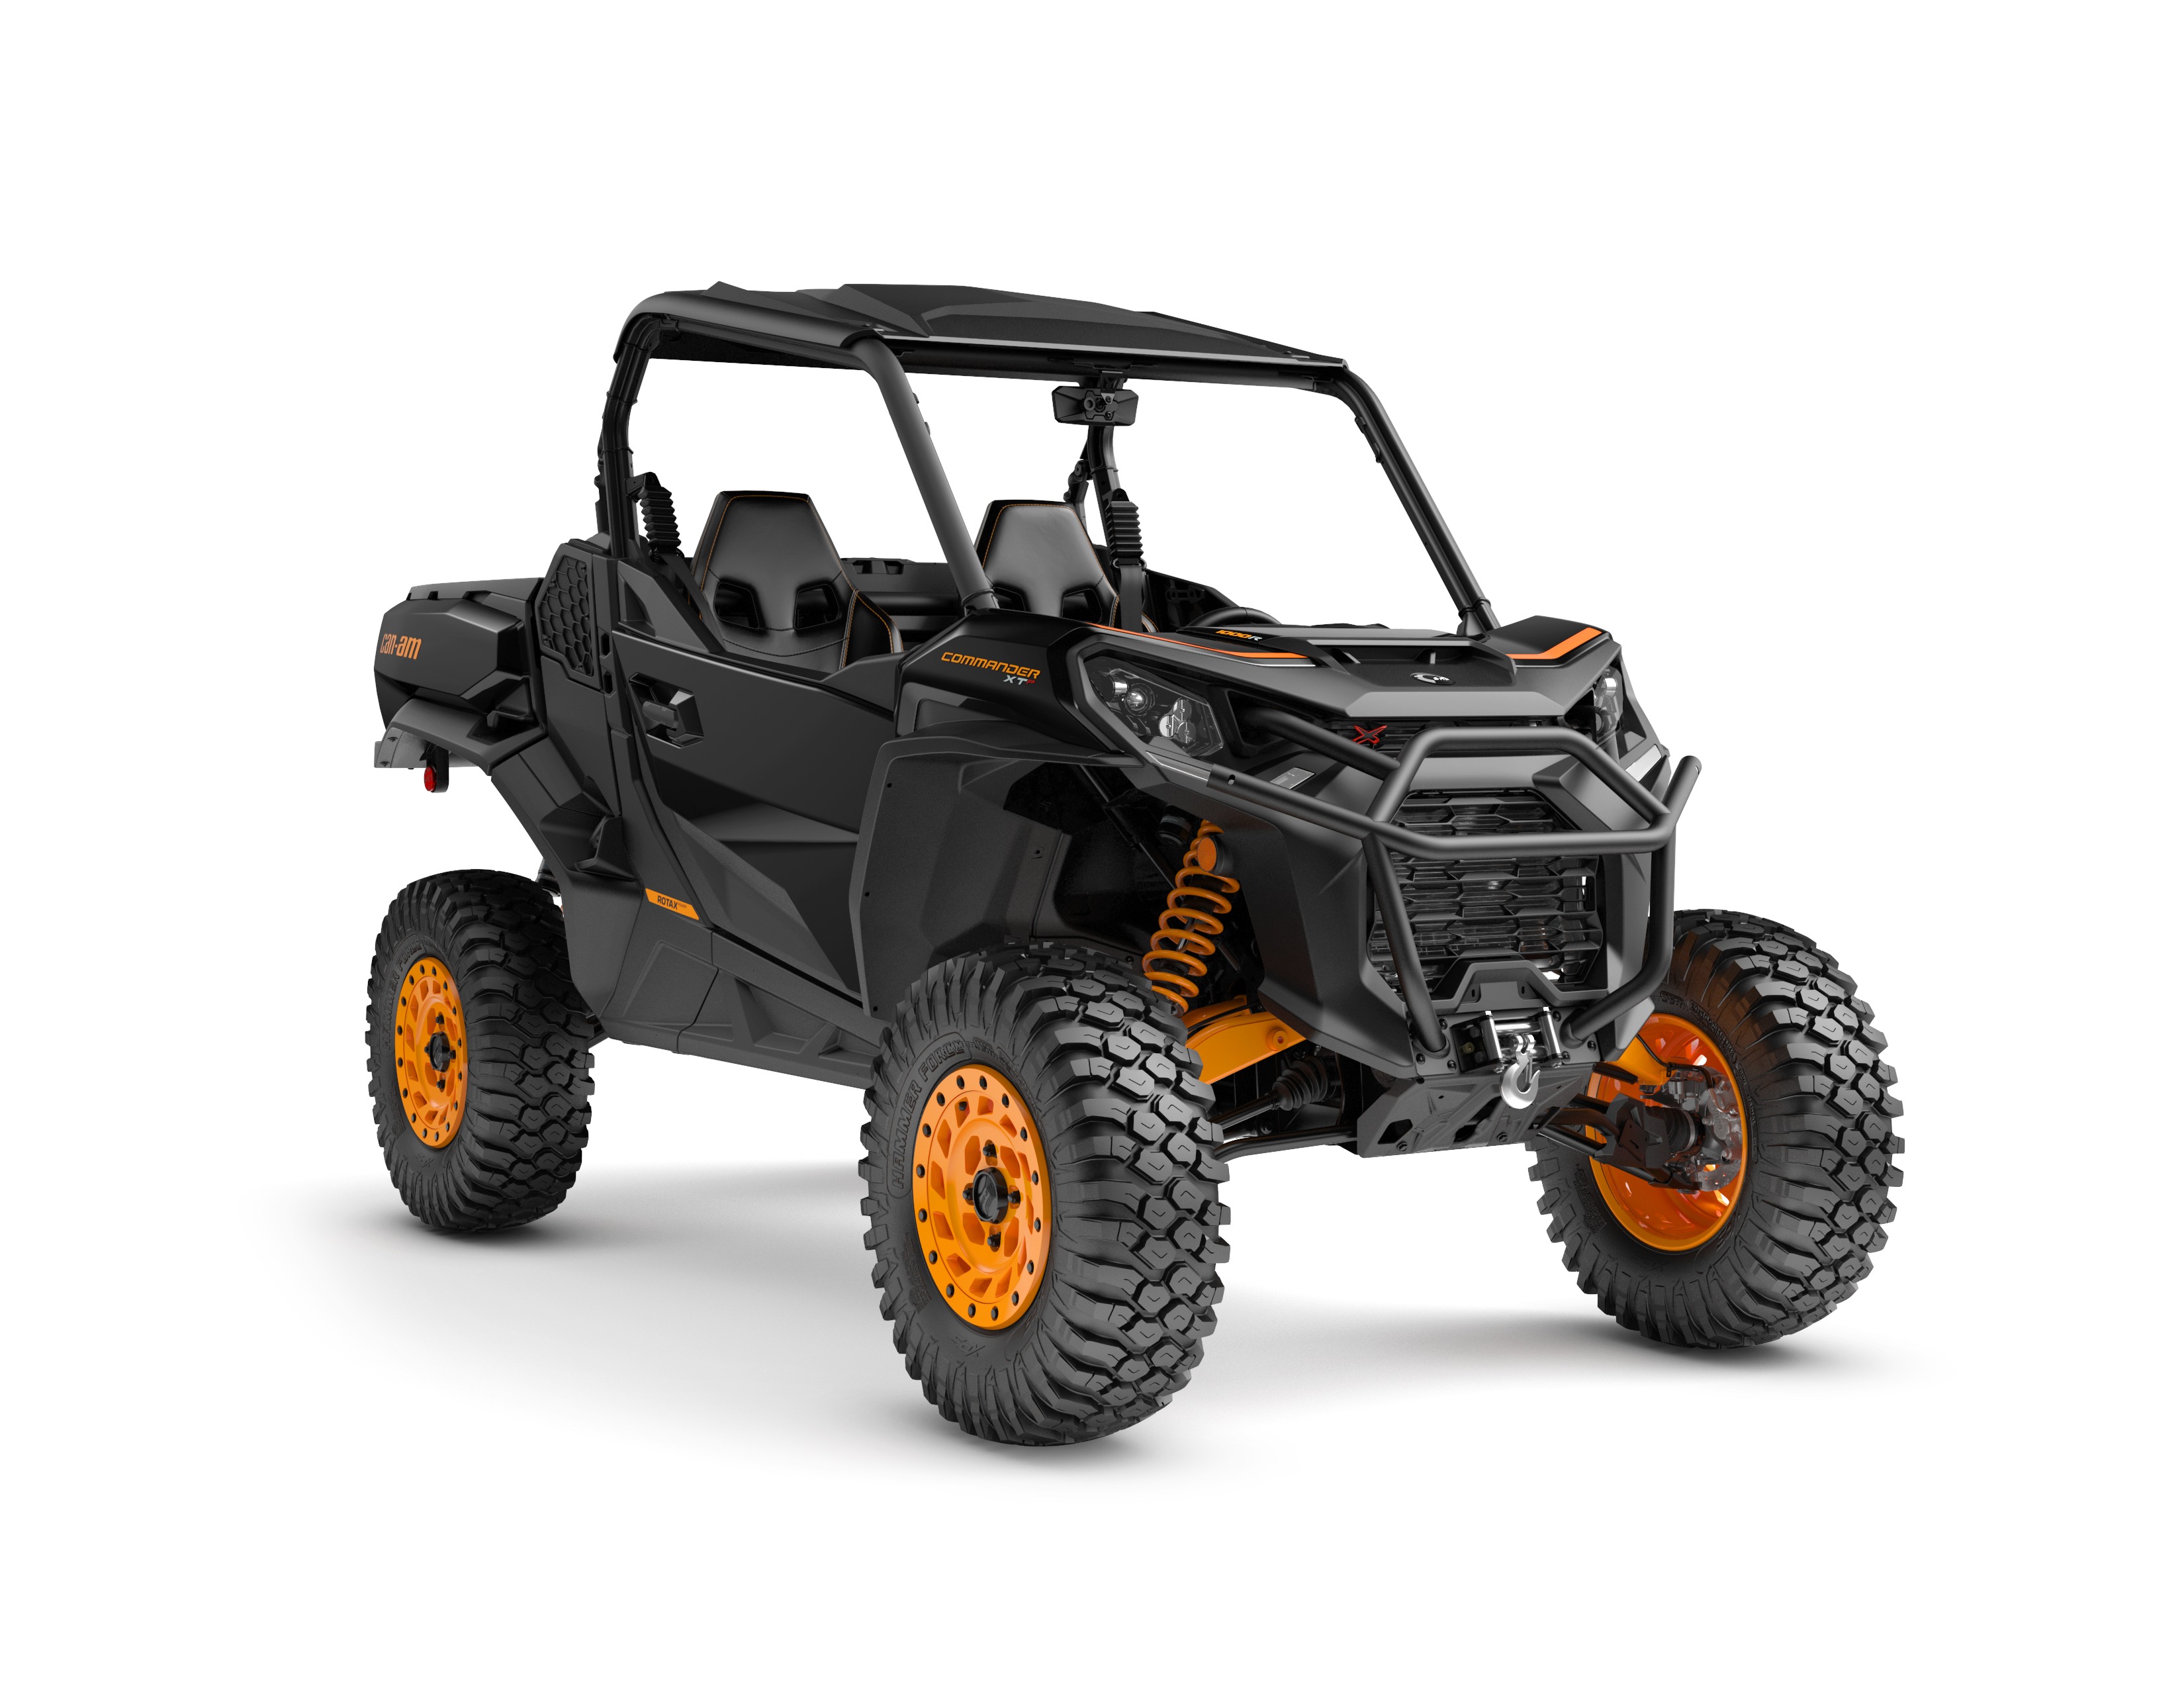 2021 CanAm Commander XTP 1000R Highlights and Specifications UTV